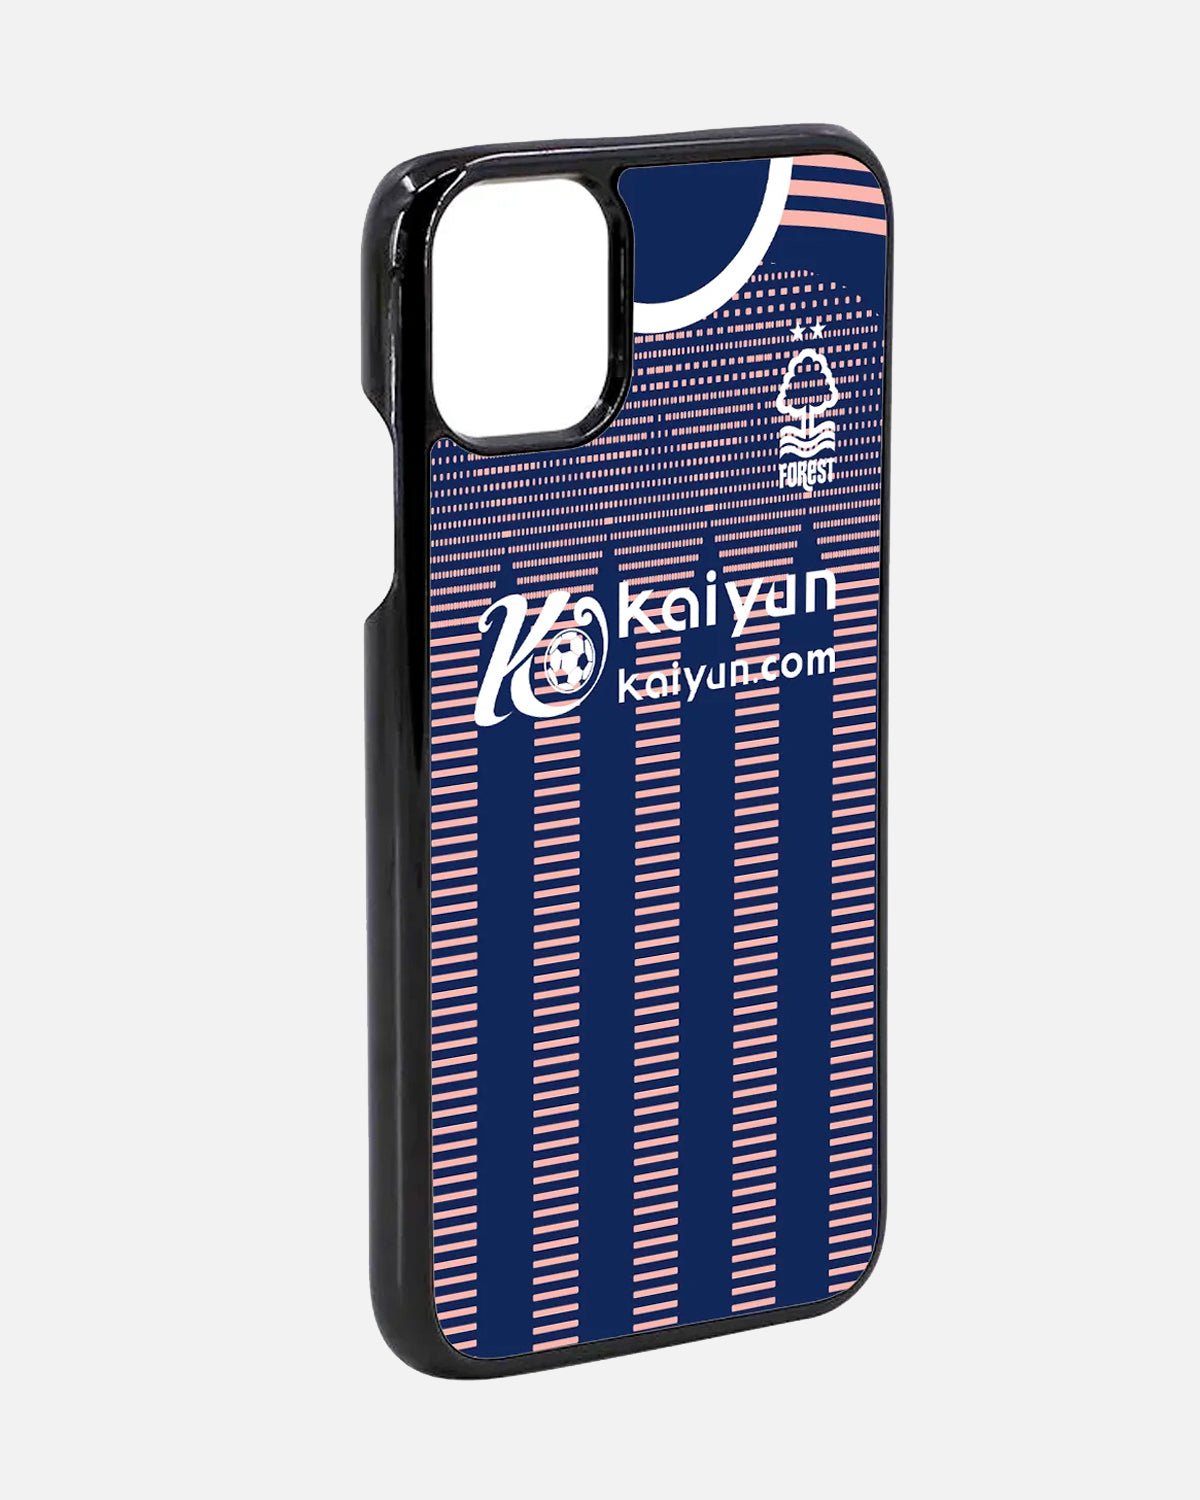 NFFC 23-24 Third Kit Phone Cover - Nottingham Forest FC